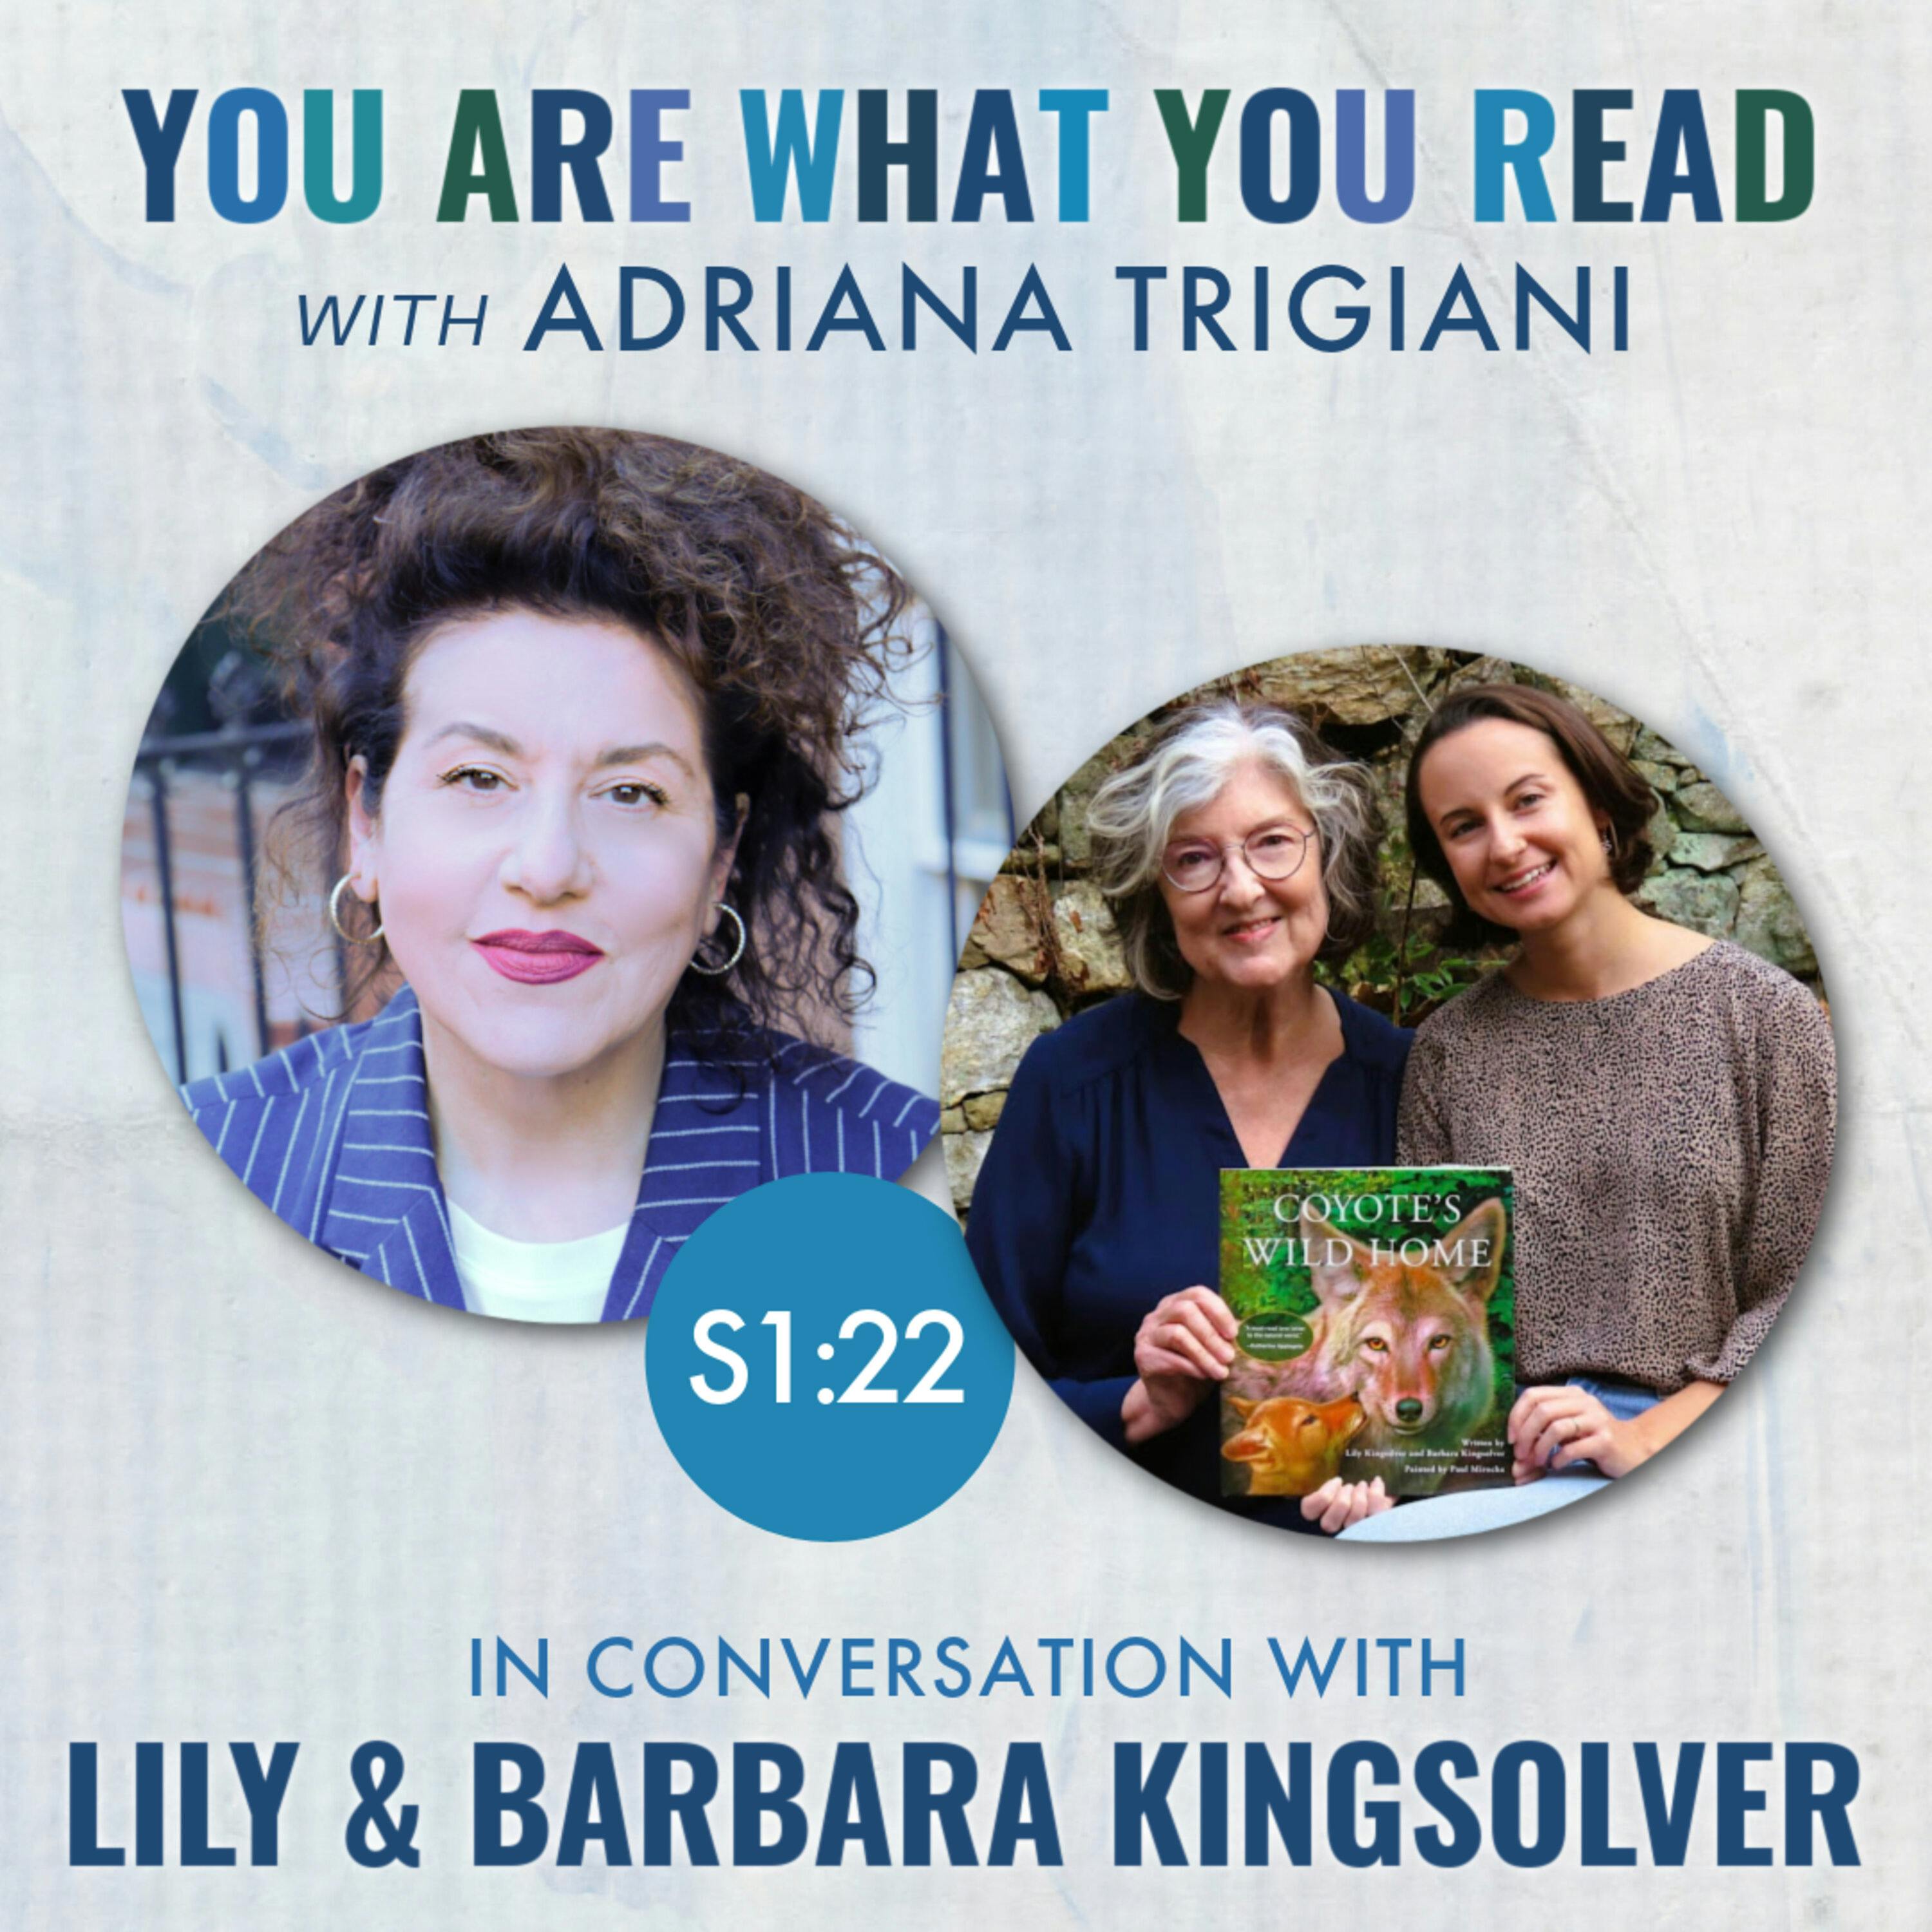 Lily and Barbara Kingsolver: Balance with our natural world